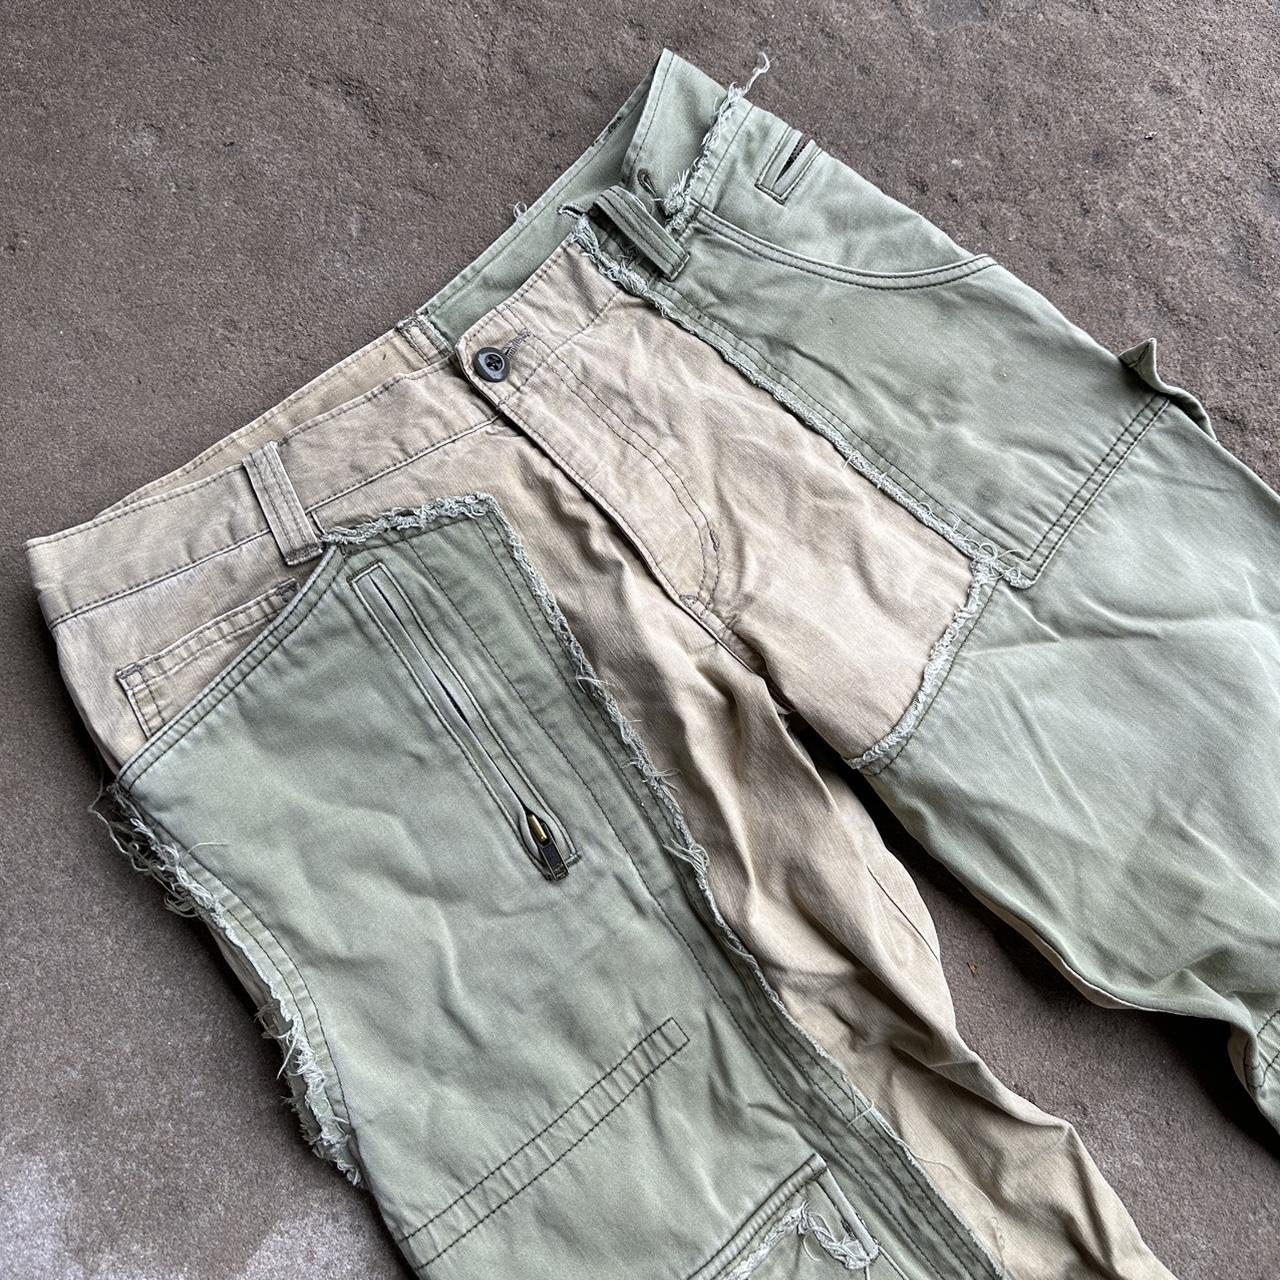 Men's Green and Cream Trousers | Depop